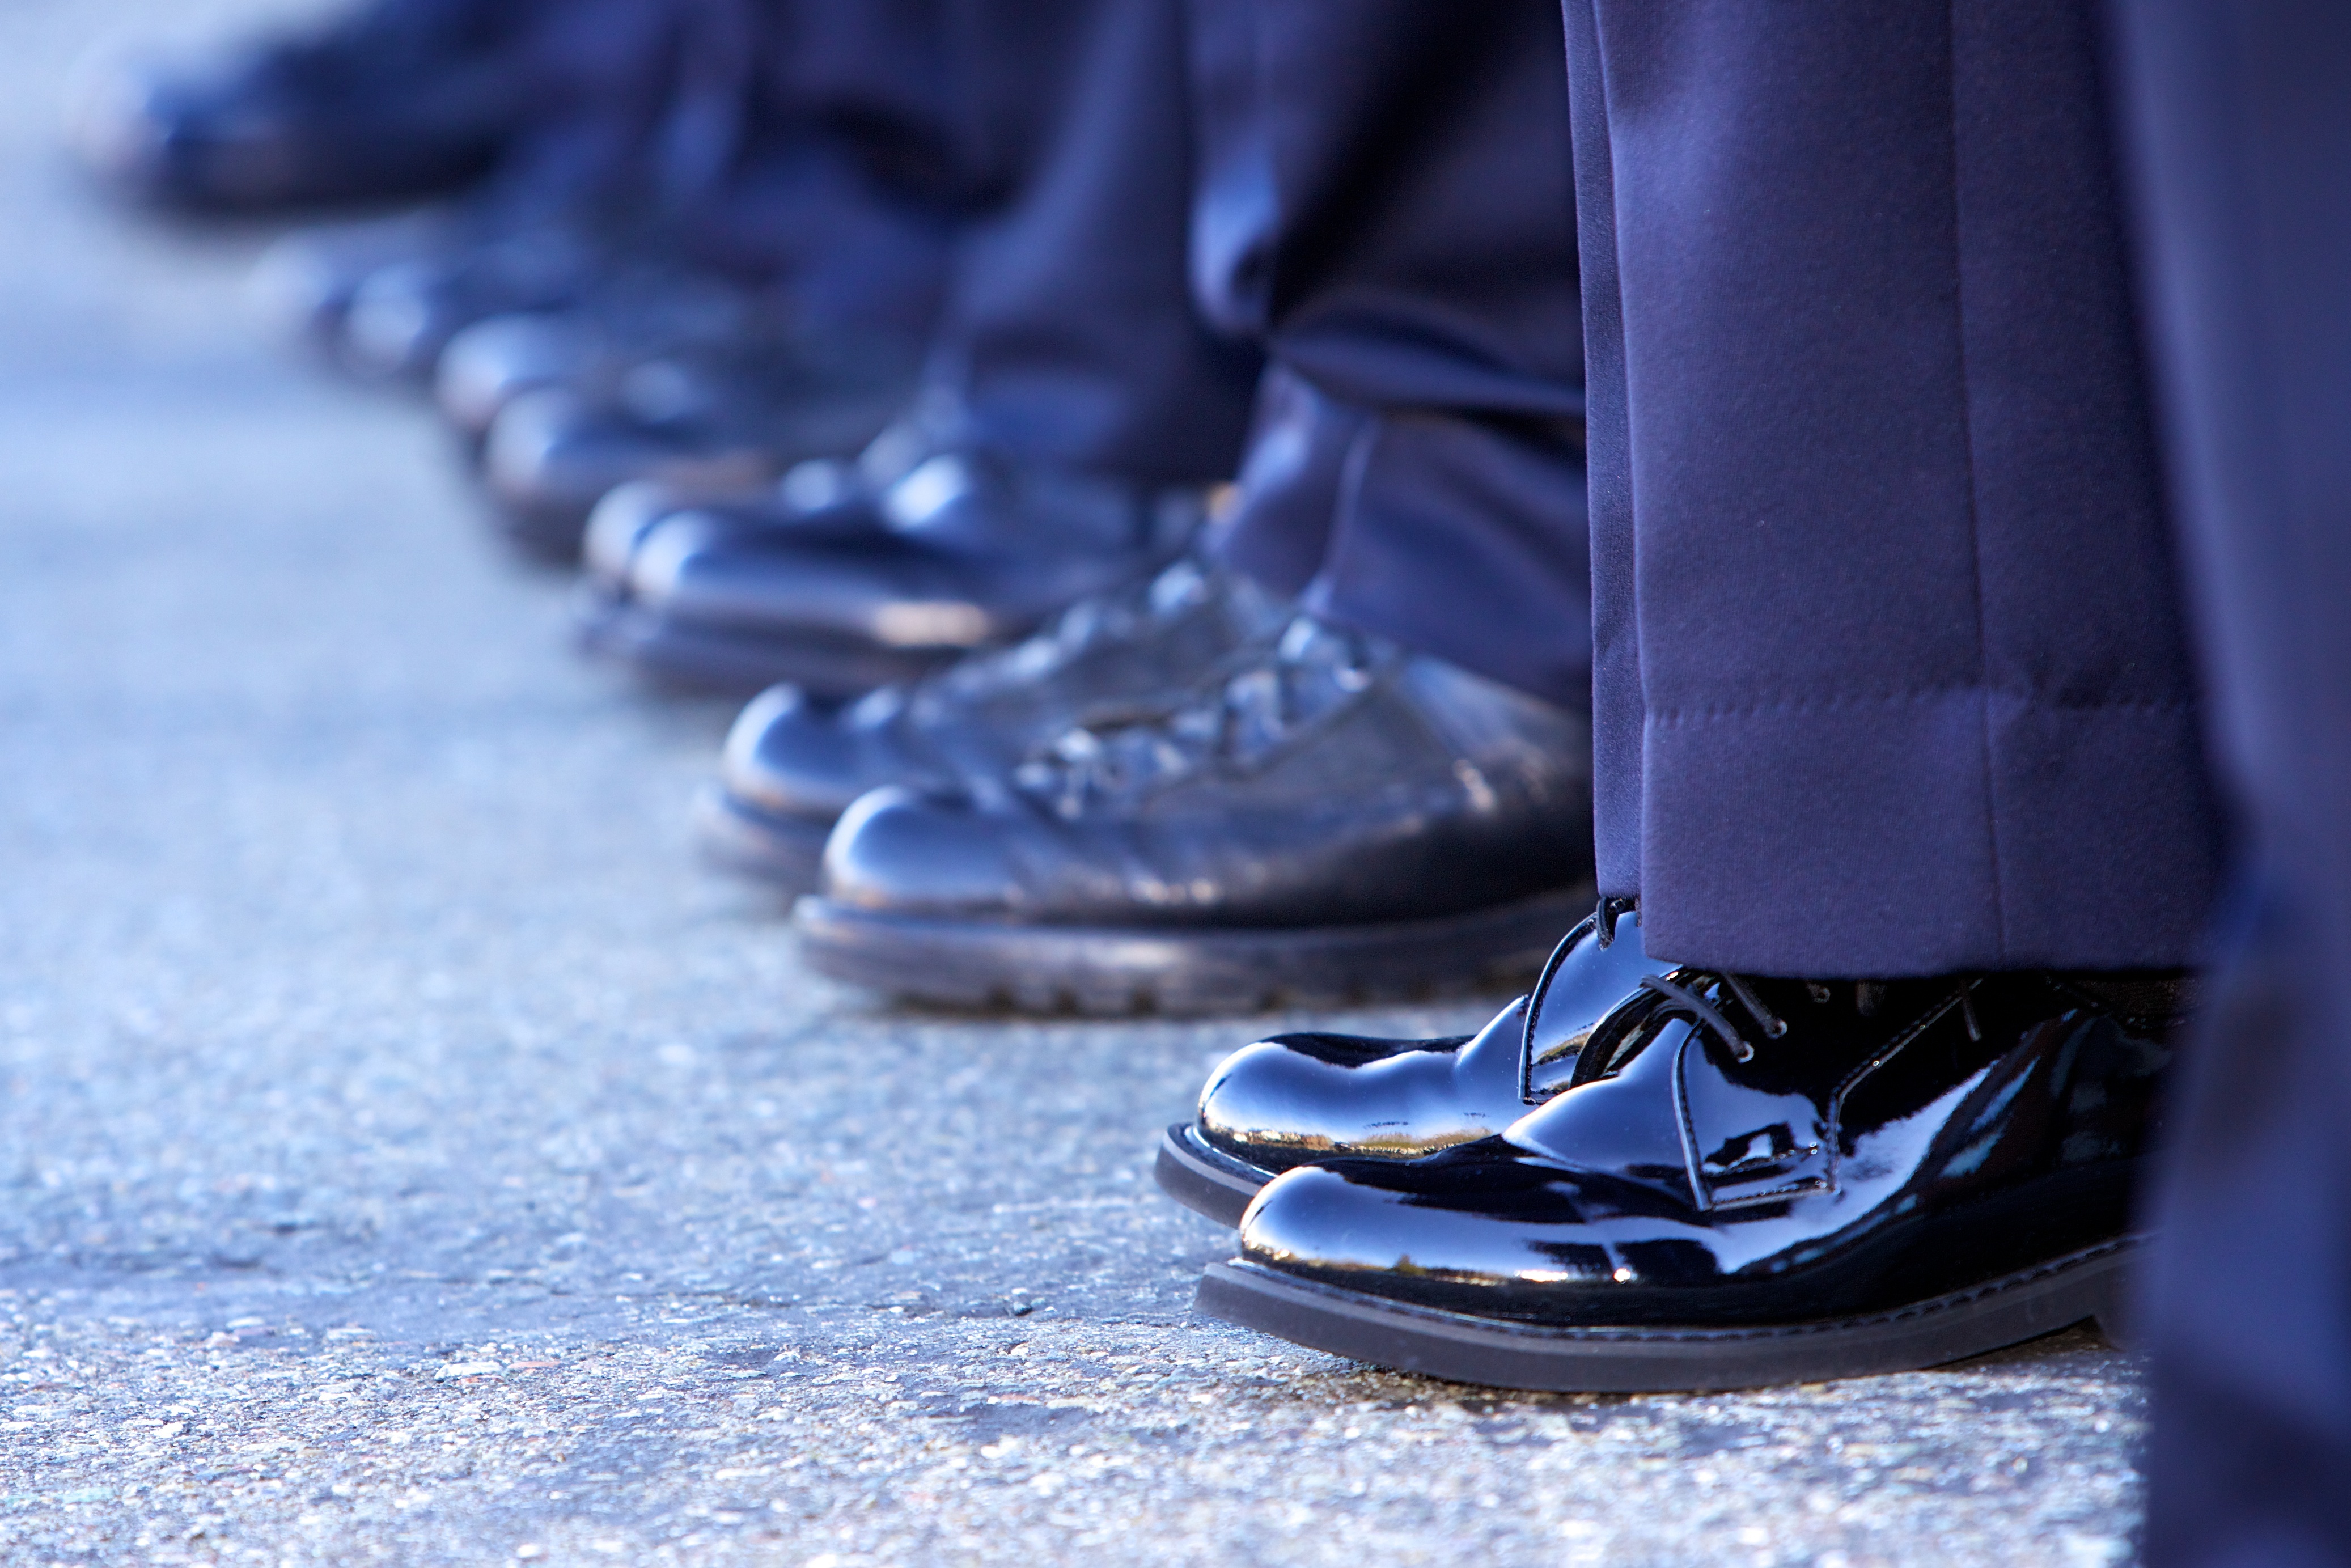 Are You Ready? Here’s What It Takes to Get into the Police Academy